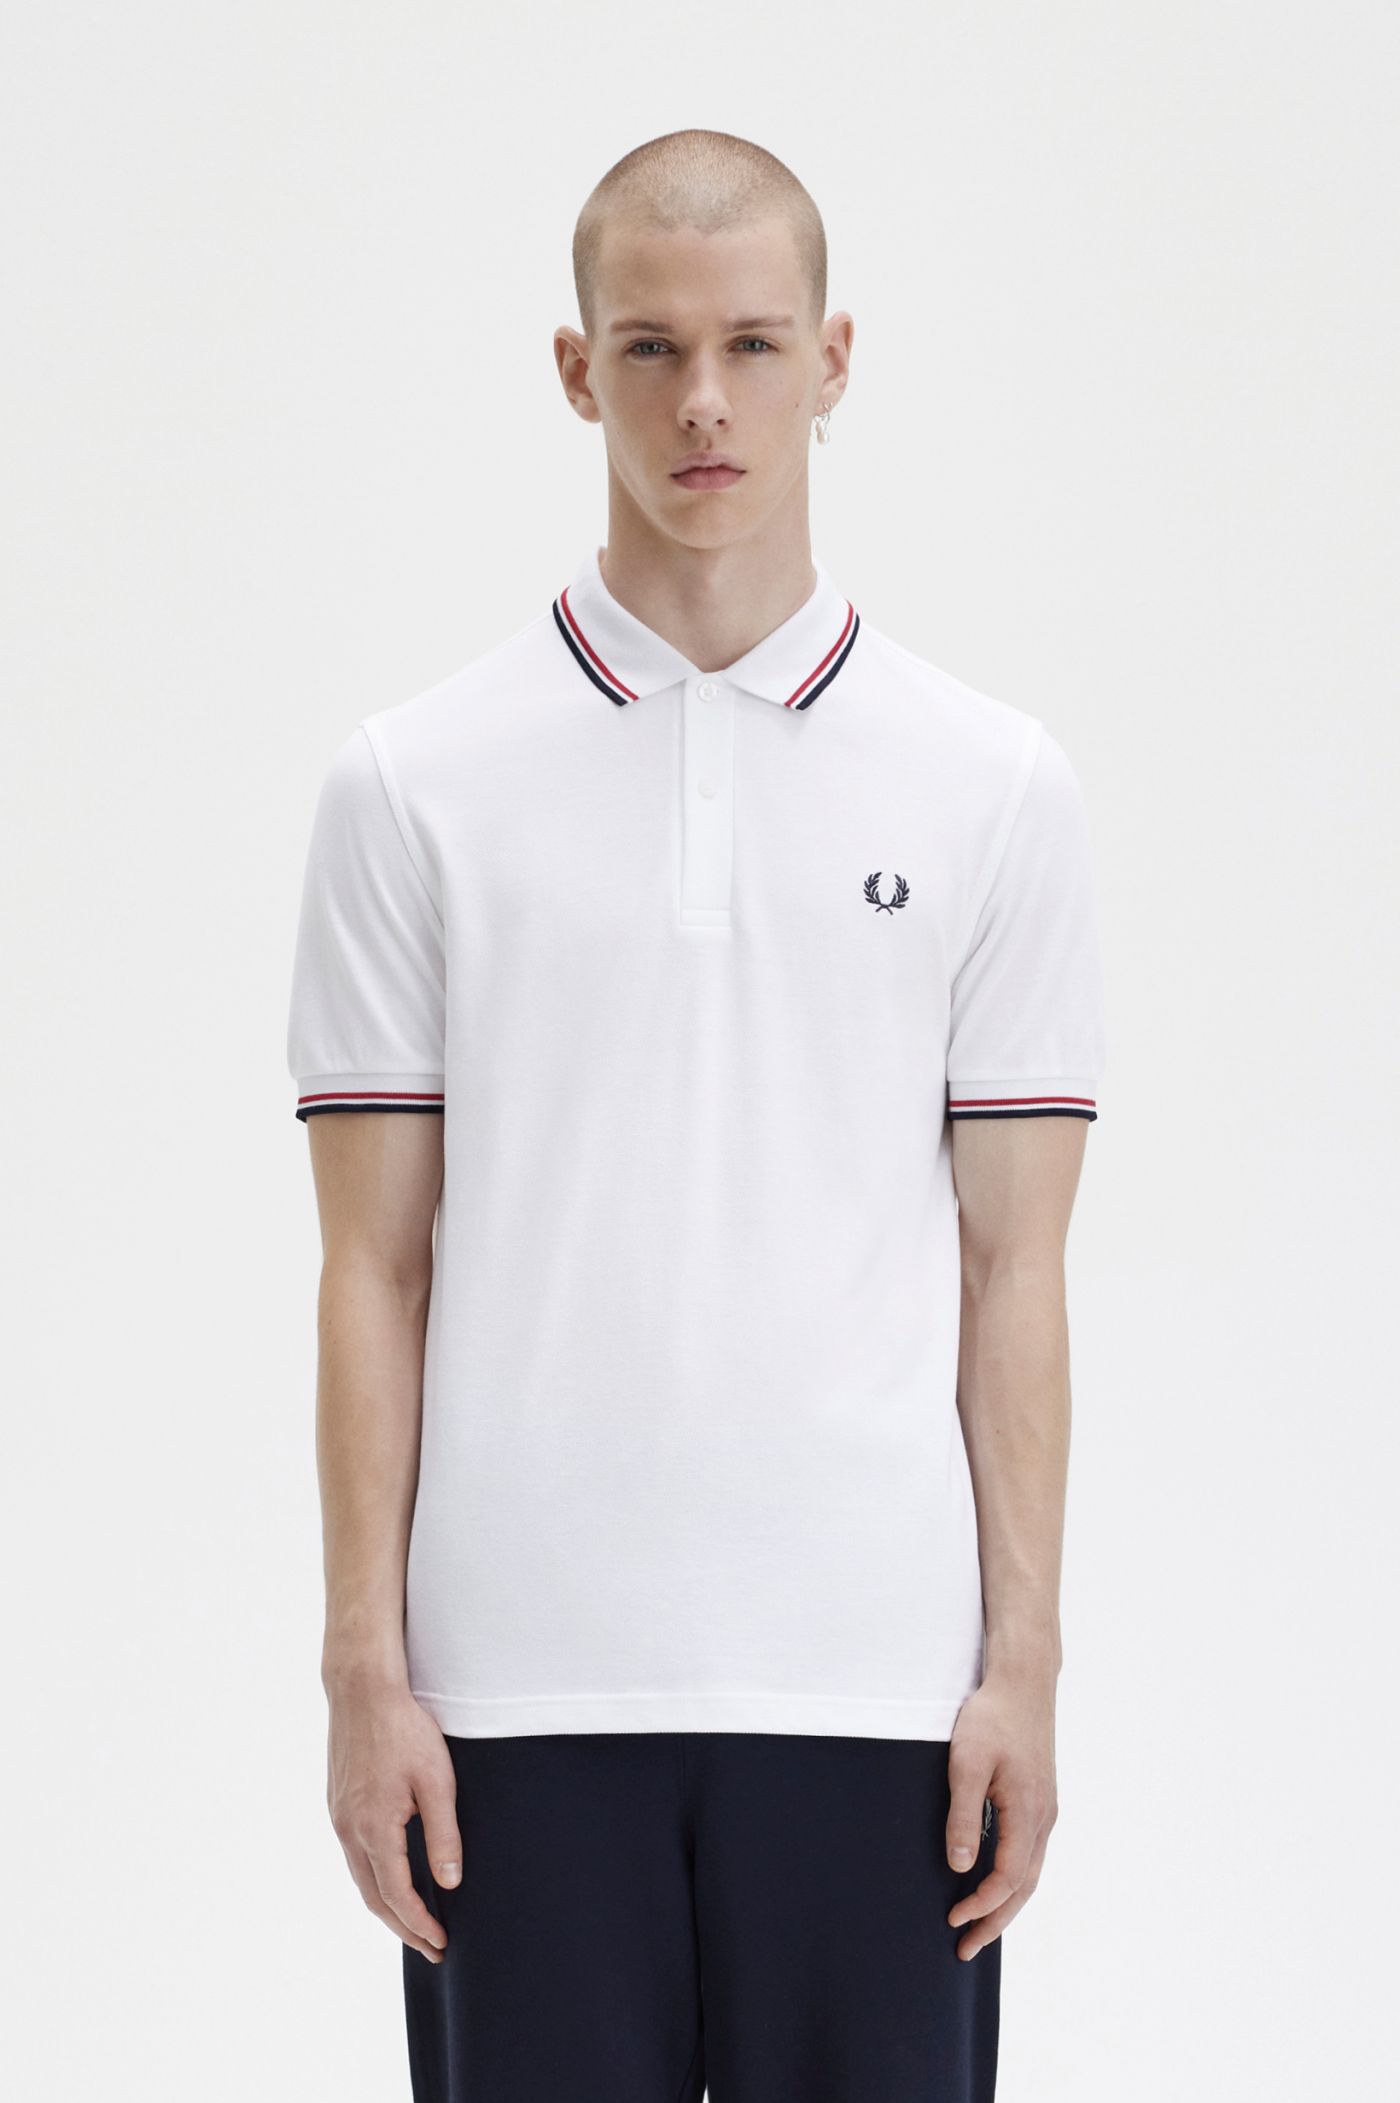 micro Klas Afslachten M3600 - White / Bright Red / Navy | The Fred Perry Shirt | Men's Short &  Long Sleeve Polo Shirts | Fred Perry US